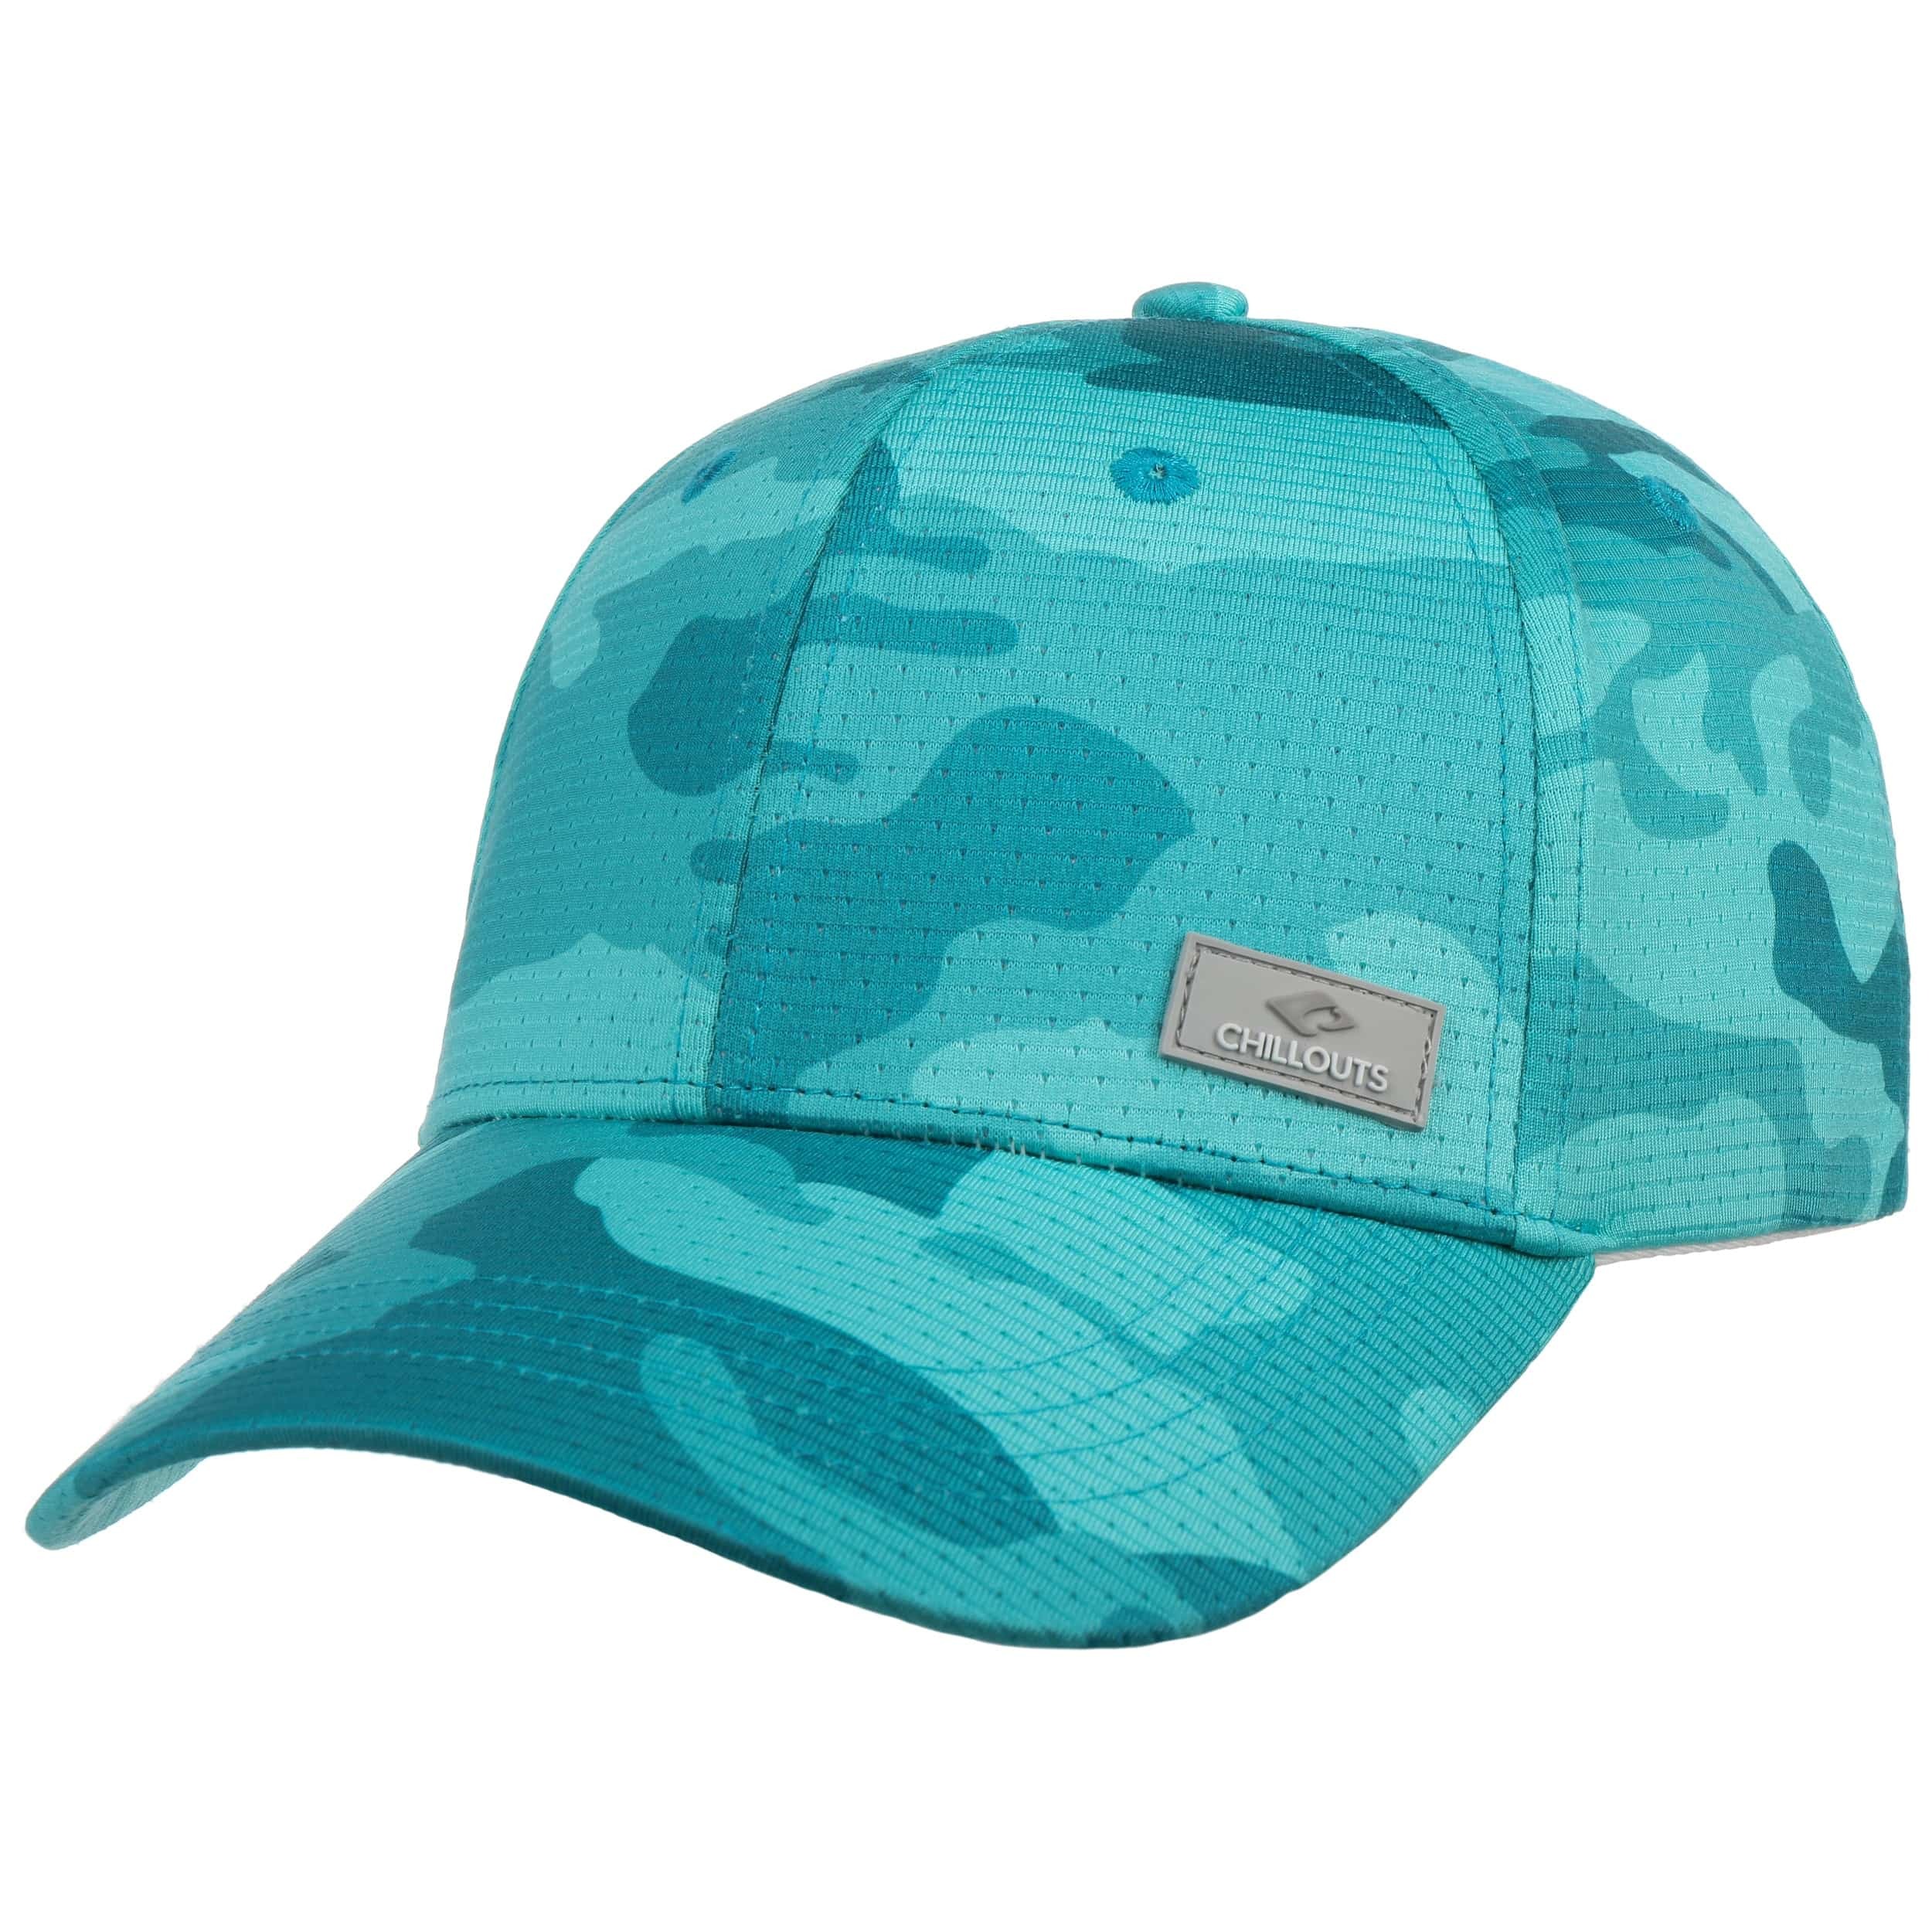 Kampala Camouflage Cap by 26,95 - € Chillouts